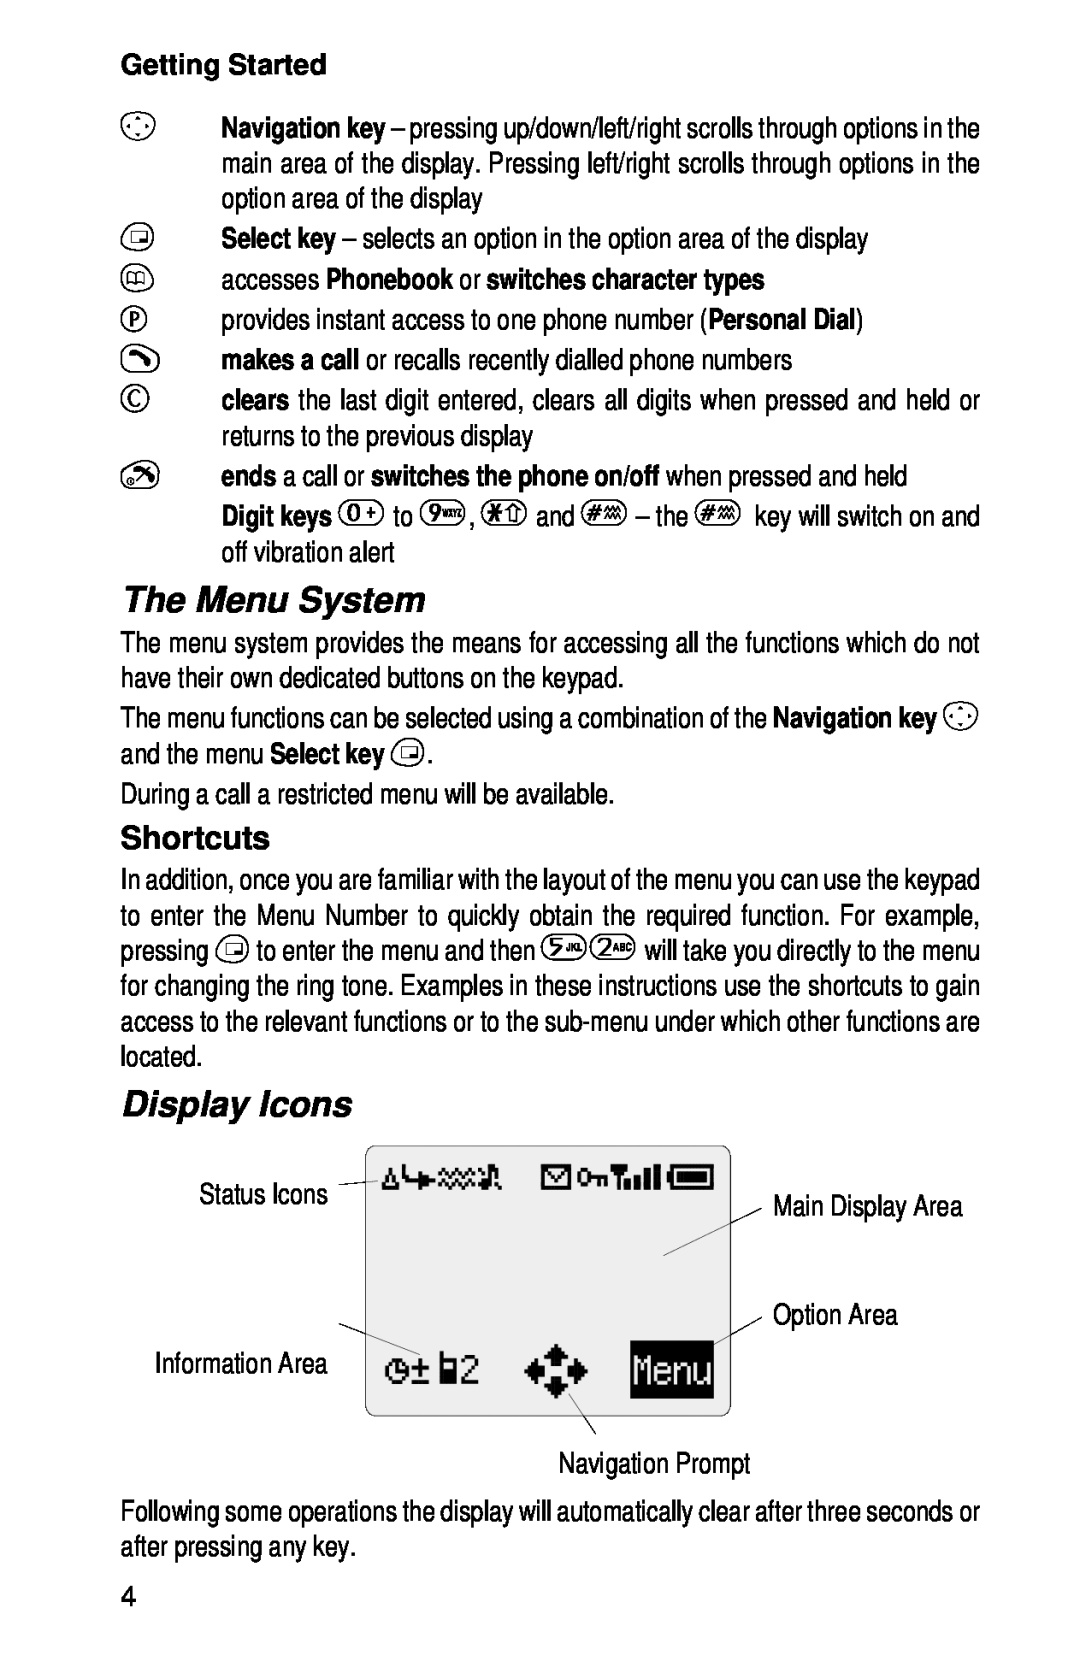 Panasonic EB-GD52 operating instructions The Menu System, Display Icons, Shortcuts, Getting Started 